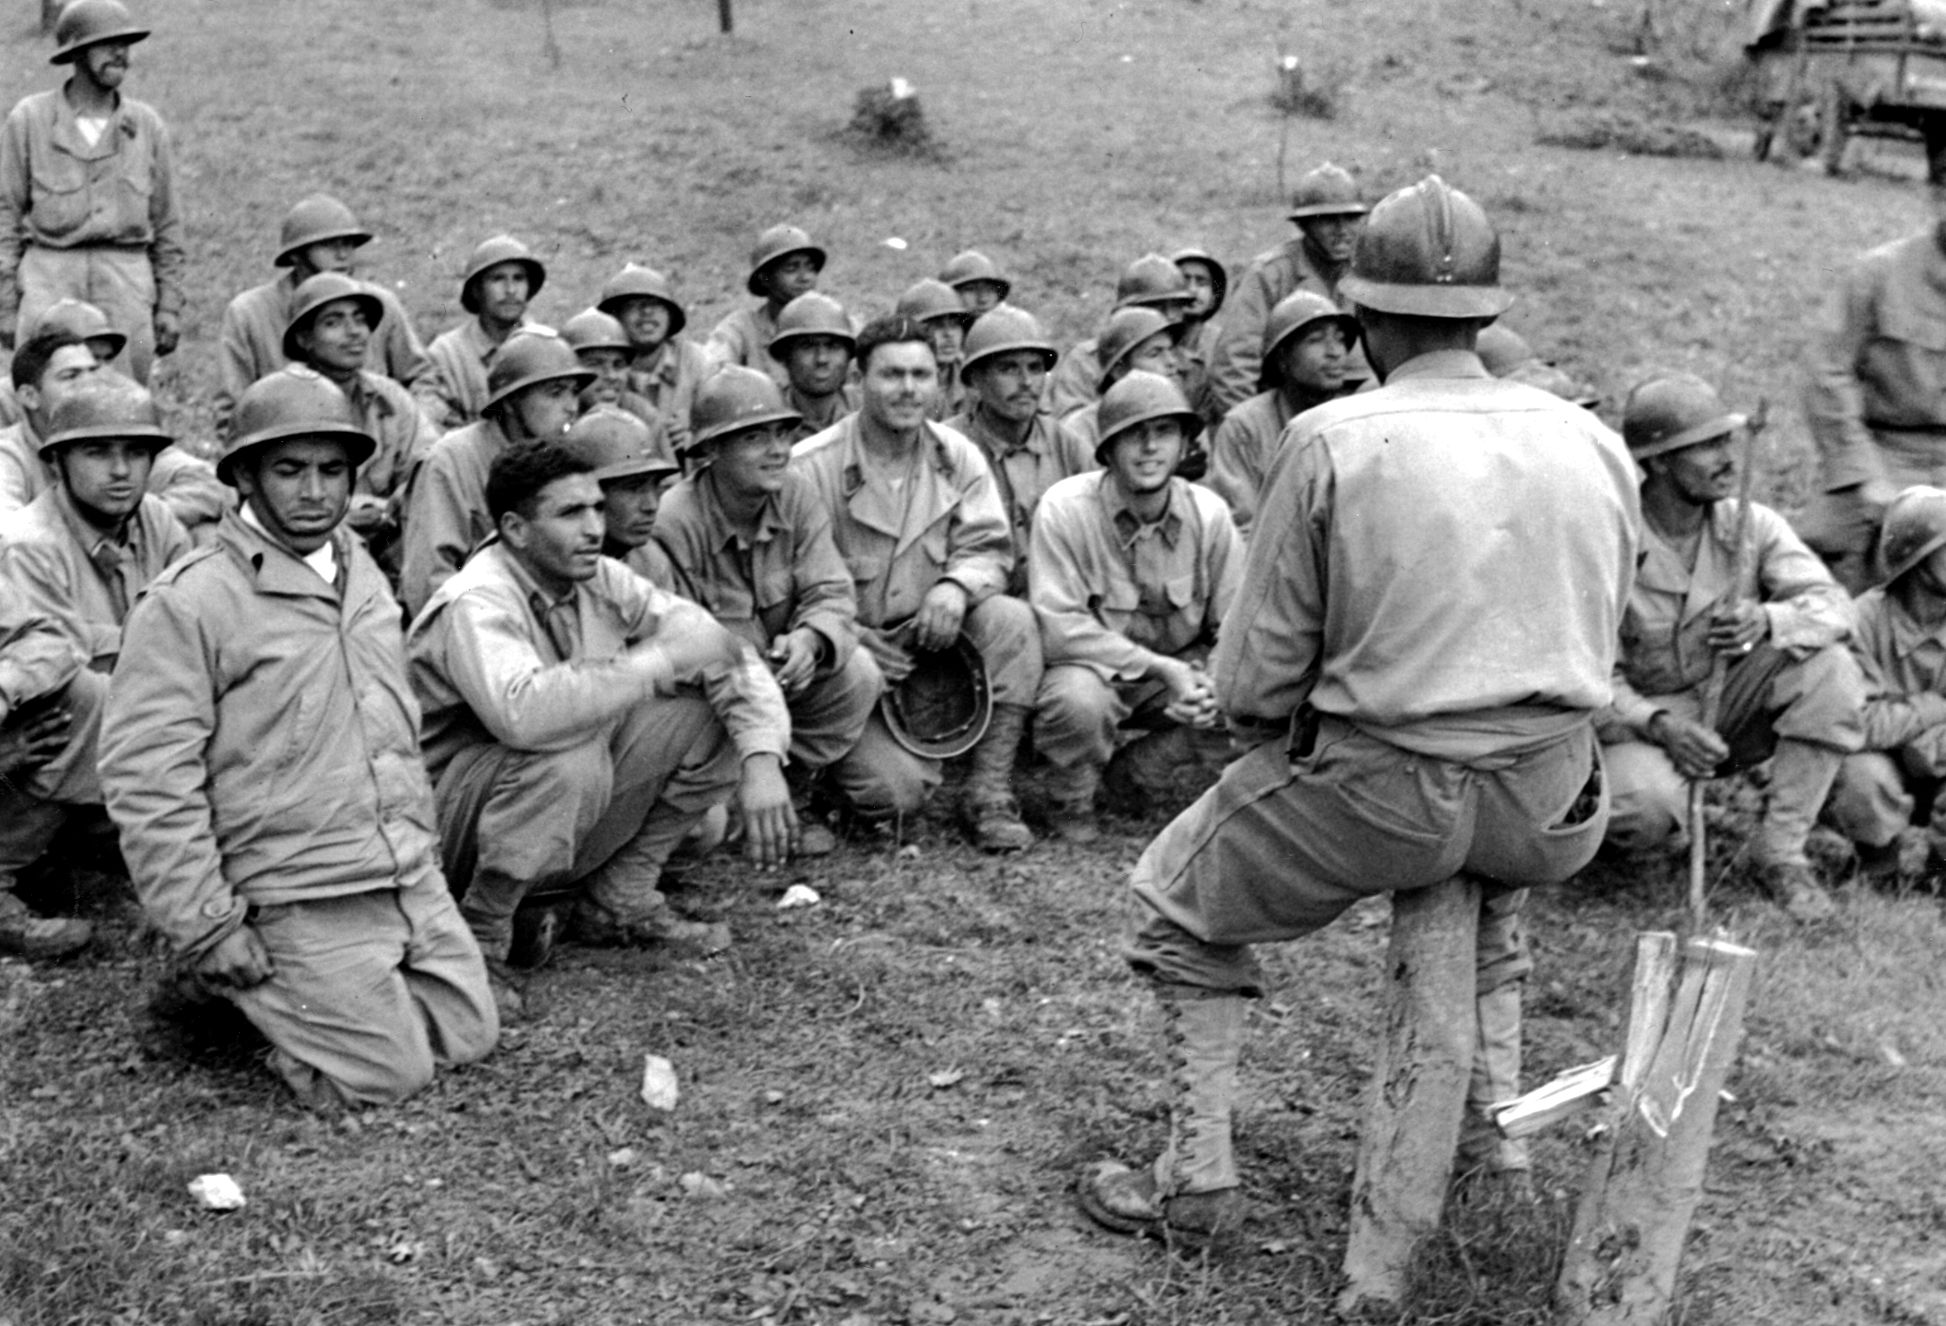 Goumiers, fierce fighters of the 2nd French Moroccan Division, receive a final briefing on German troop dispositions prior to relieving the U.S. 34th Infantry Division on the front line near Cassino in December 1943. The rugged Goumiers were already renowned for their combat skills in mountainous terrain prior to their arrival in Italy.